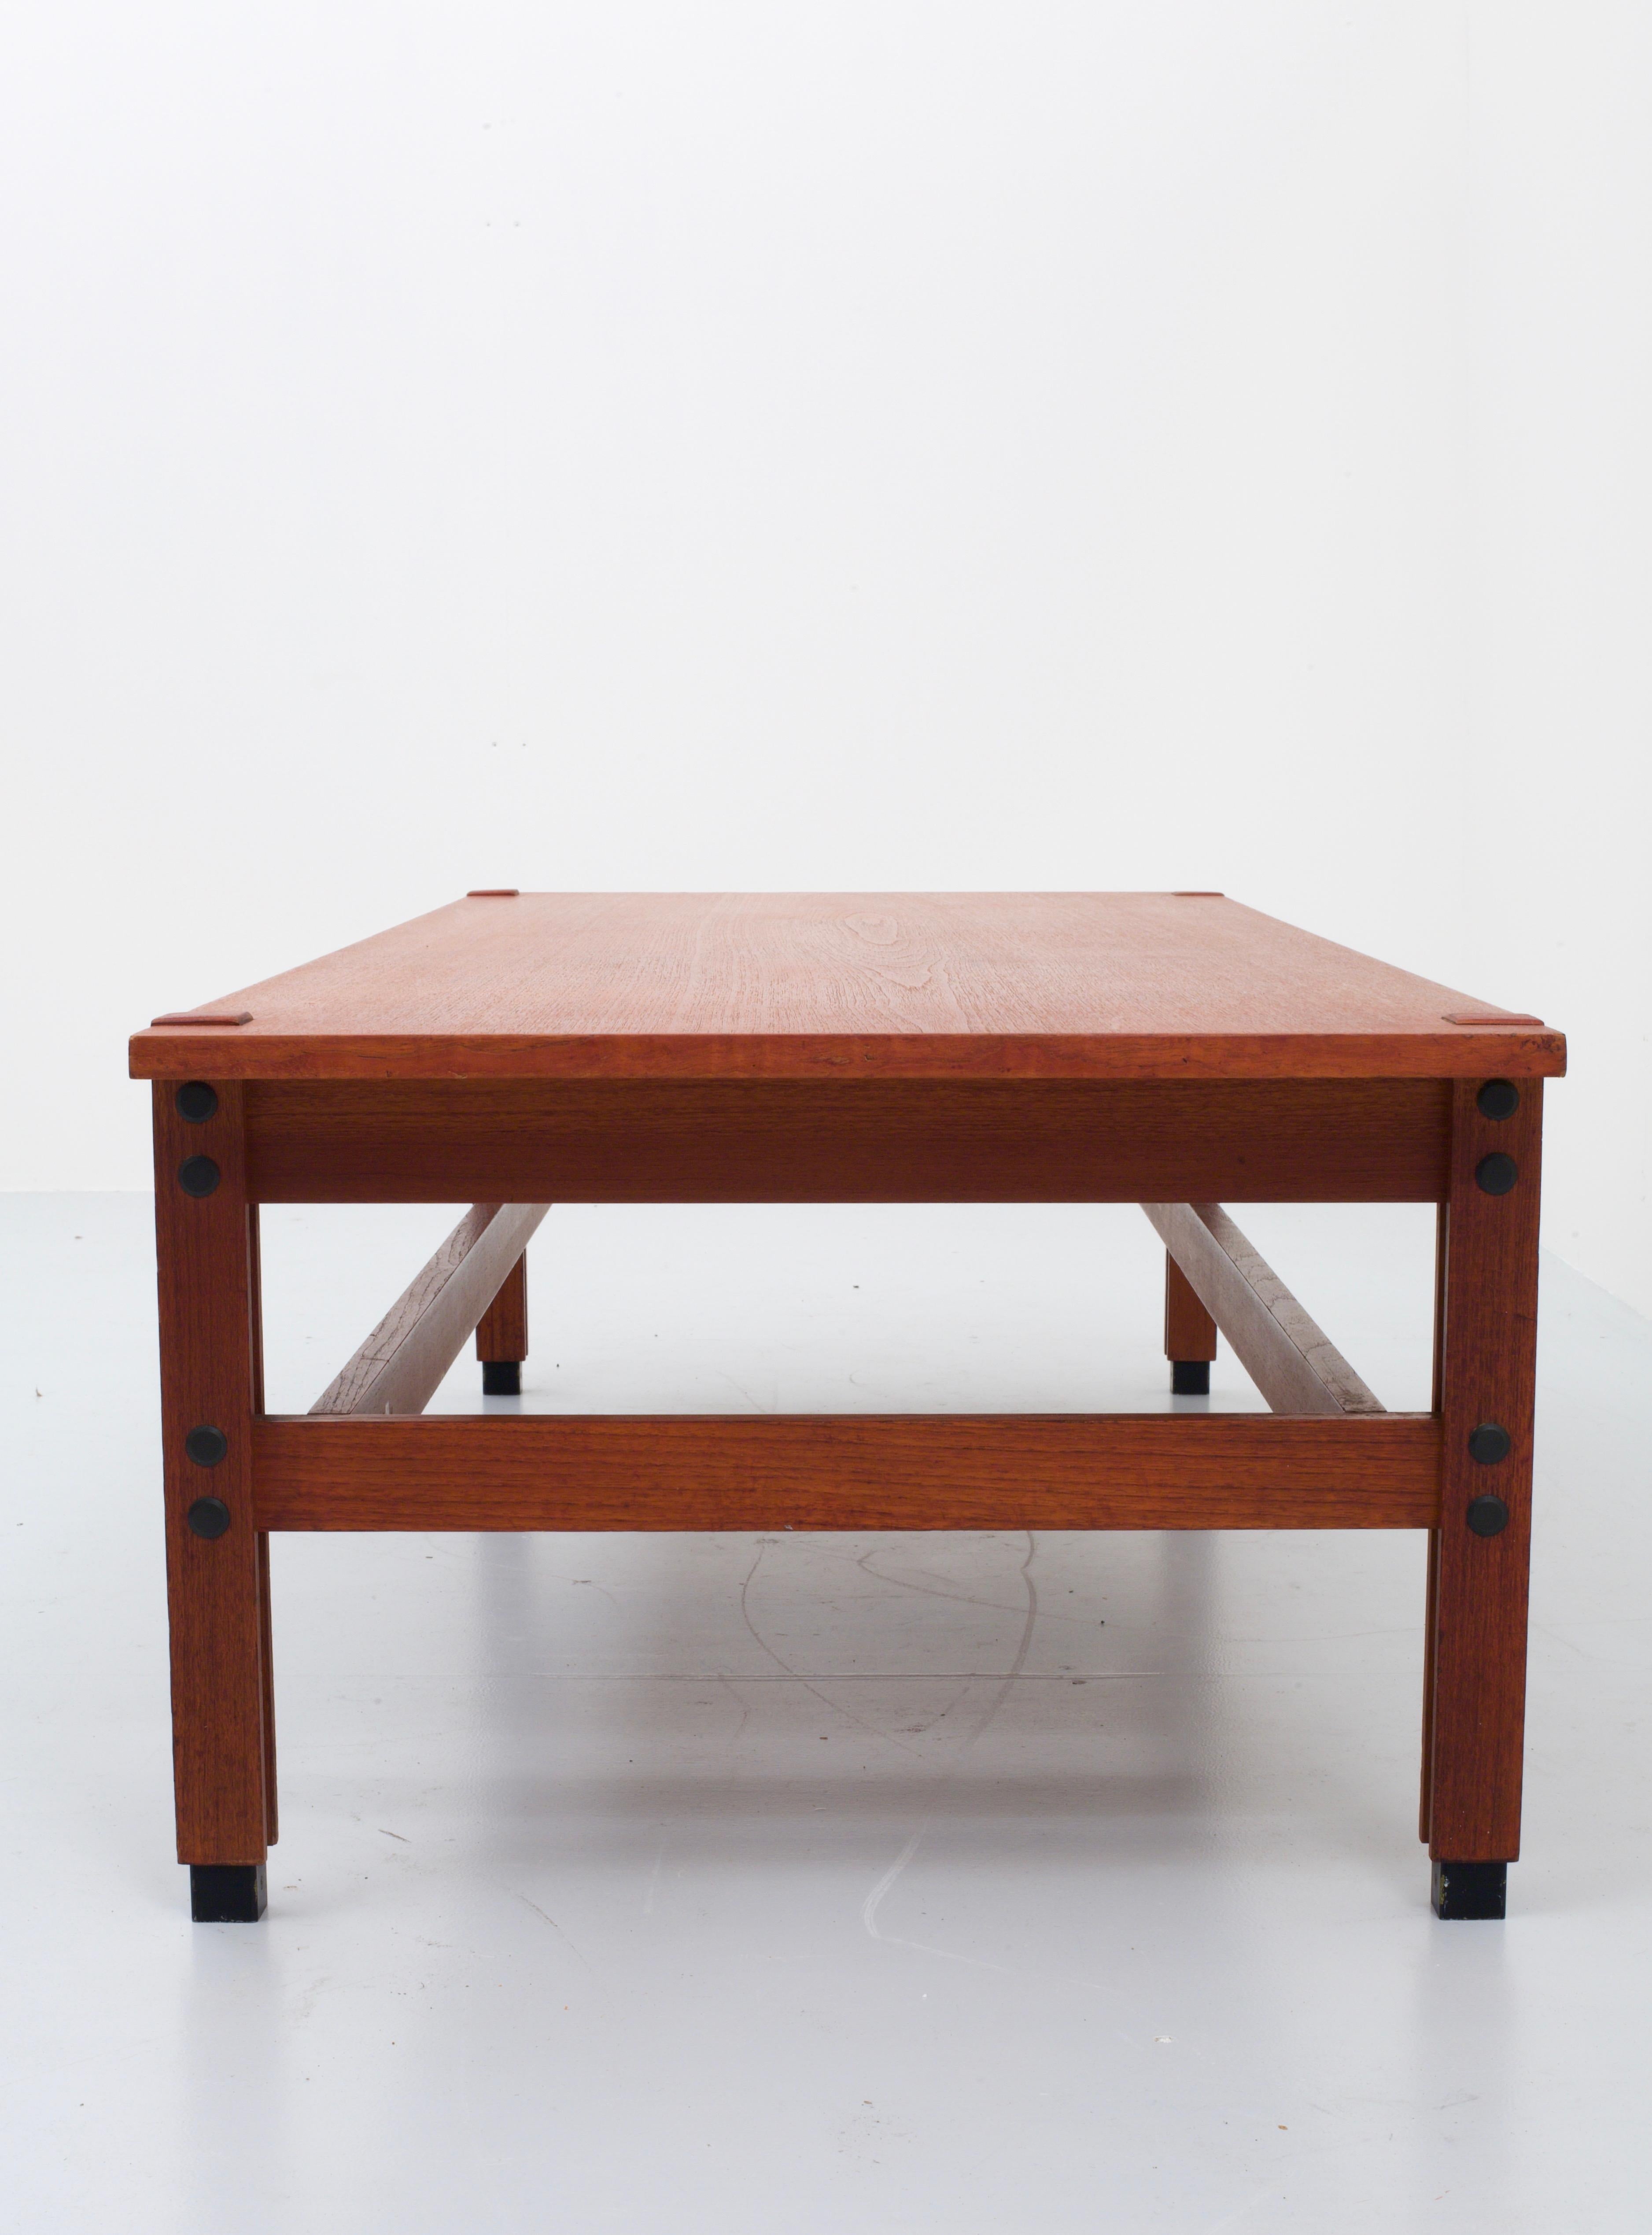 Ico Parisi ‘Tivoli’ Coffee Table in Teak for MIM Roma, Italy, 1958 In Good Condition For Sale In Amsterdam, NL